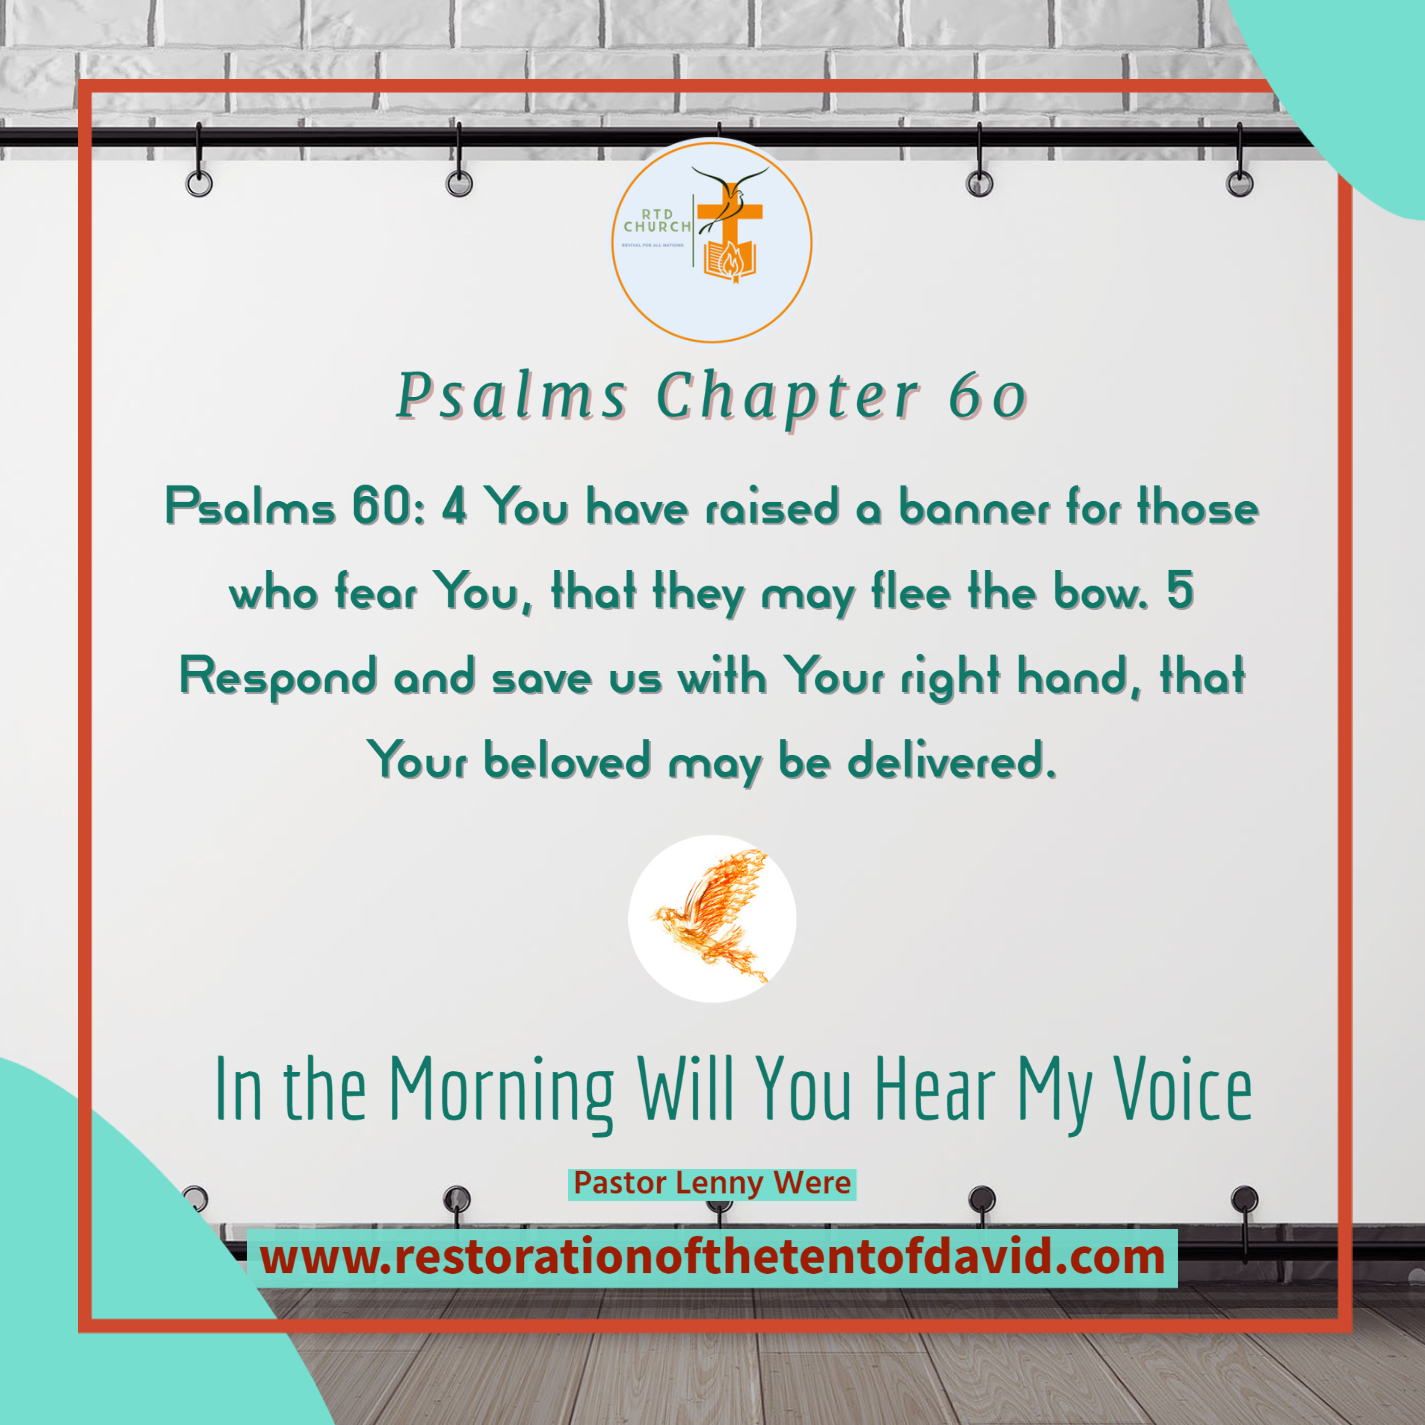 In the morning will you hear my voice, Psalms Chapter 60